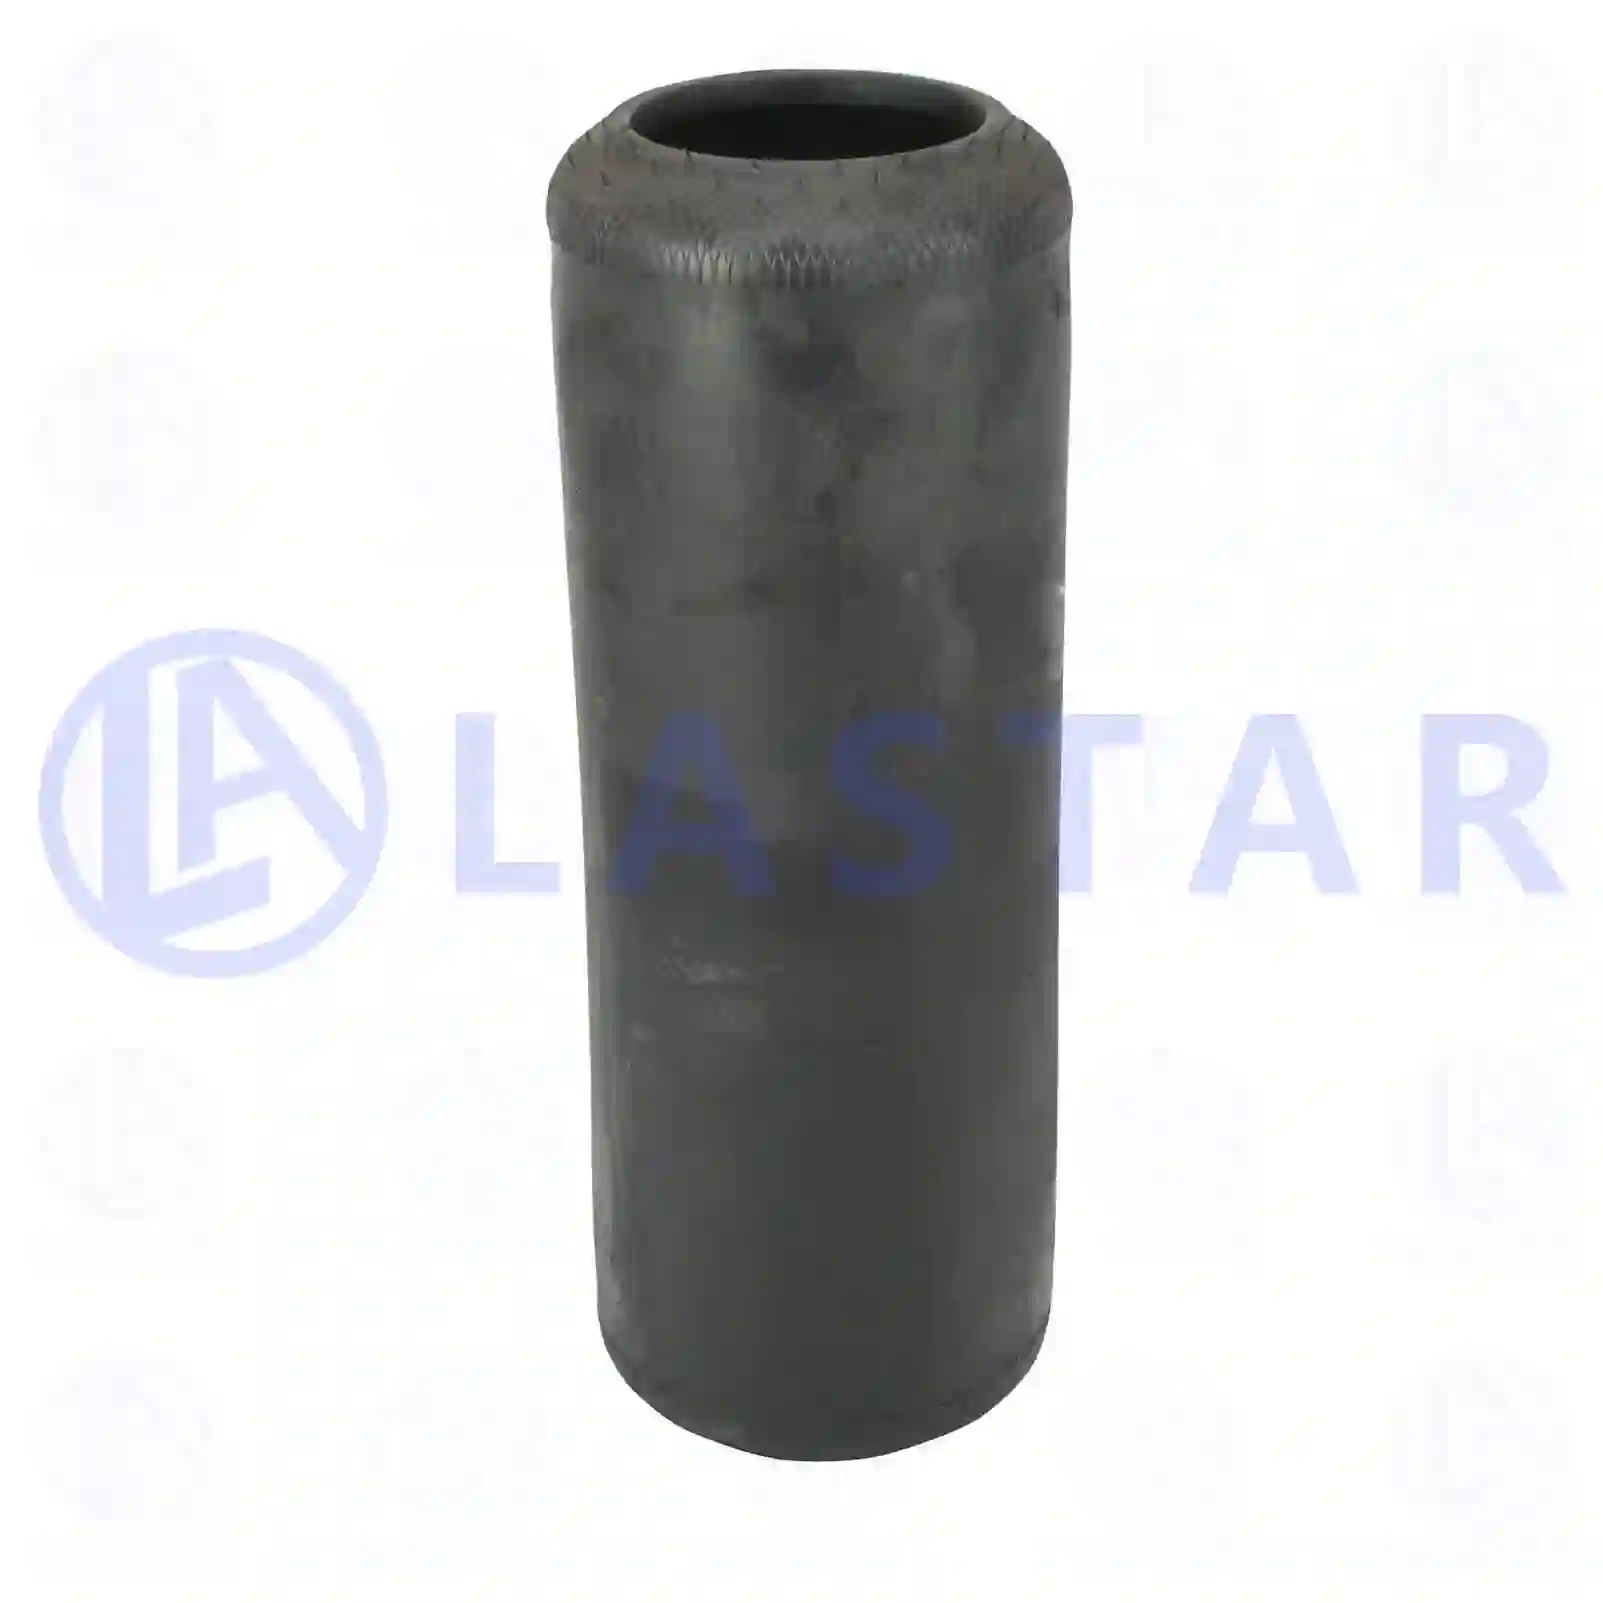 Air spring, without piston, 77727626, MLF7010, 411627, 473049 ||  77727626 Lastar Spare Part | Truck Spare Parts, Auotomotive Spare Parts Air spring, without piston, 77727626, MLF7010, 411627, 473049 ||  77727626 Lastar Spare Part | Truck Spare Parts, Auotomotive Spare Parts